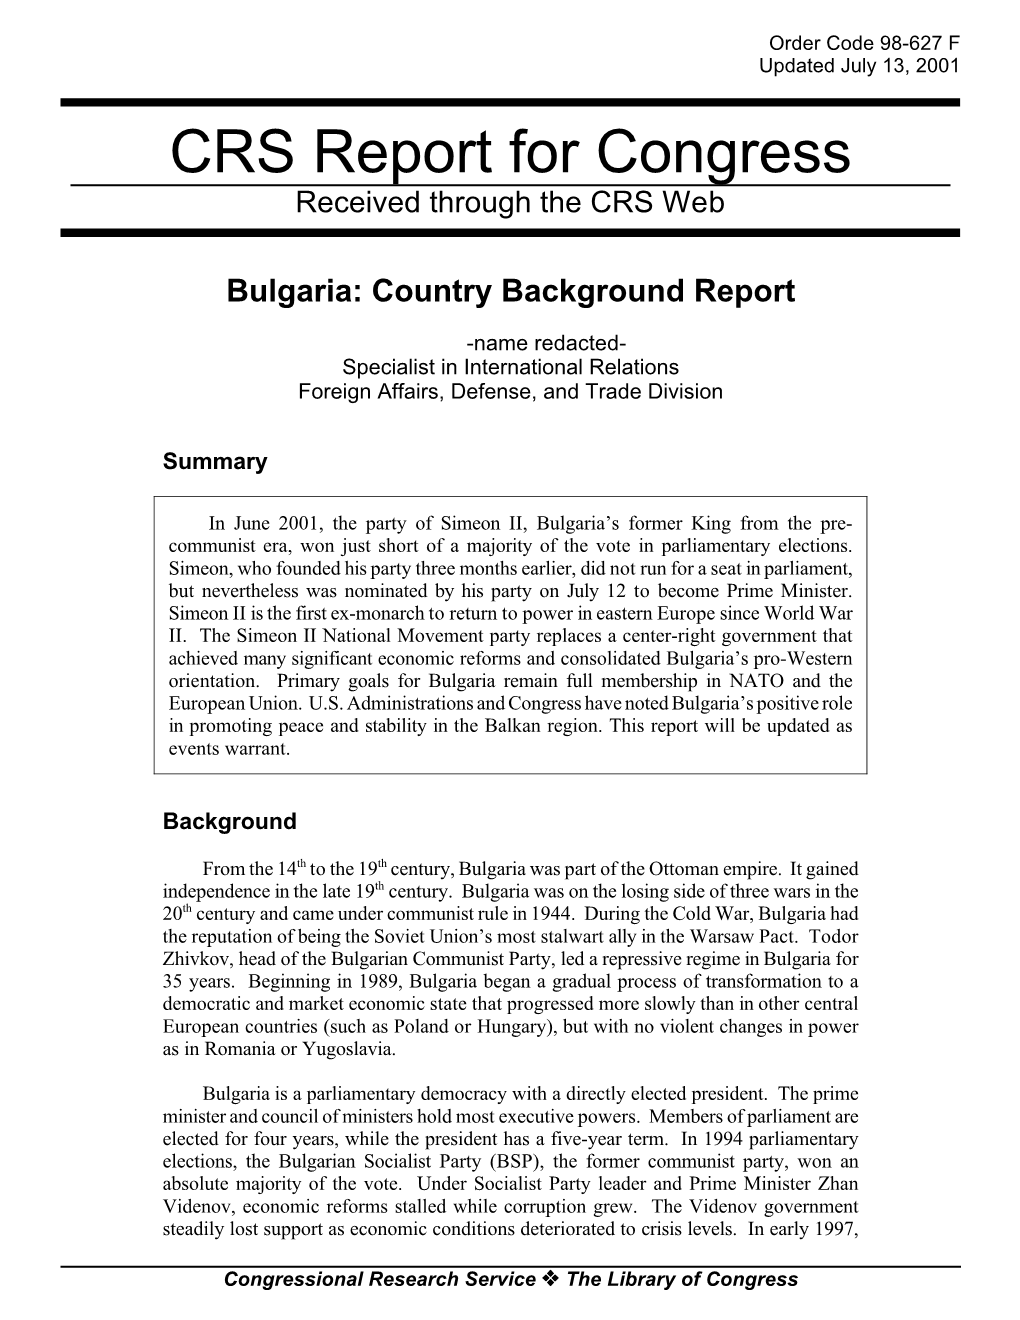 Bulgaria: Country Background Report